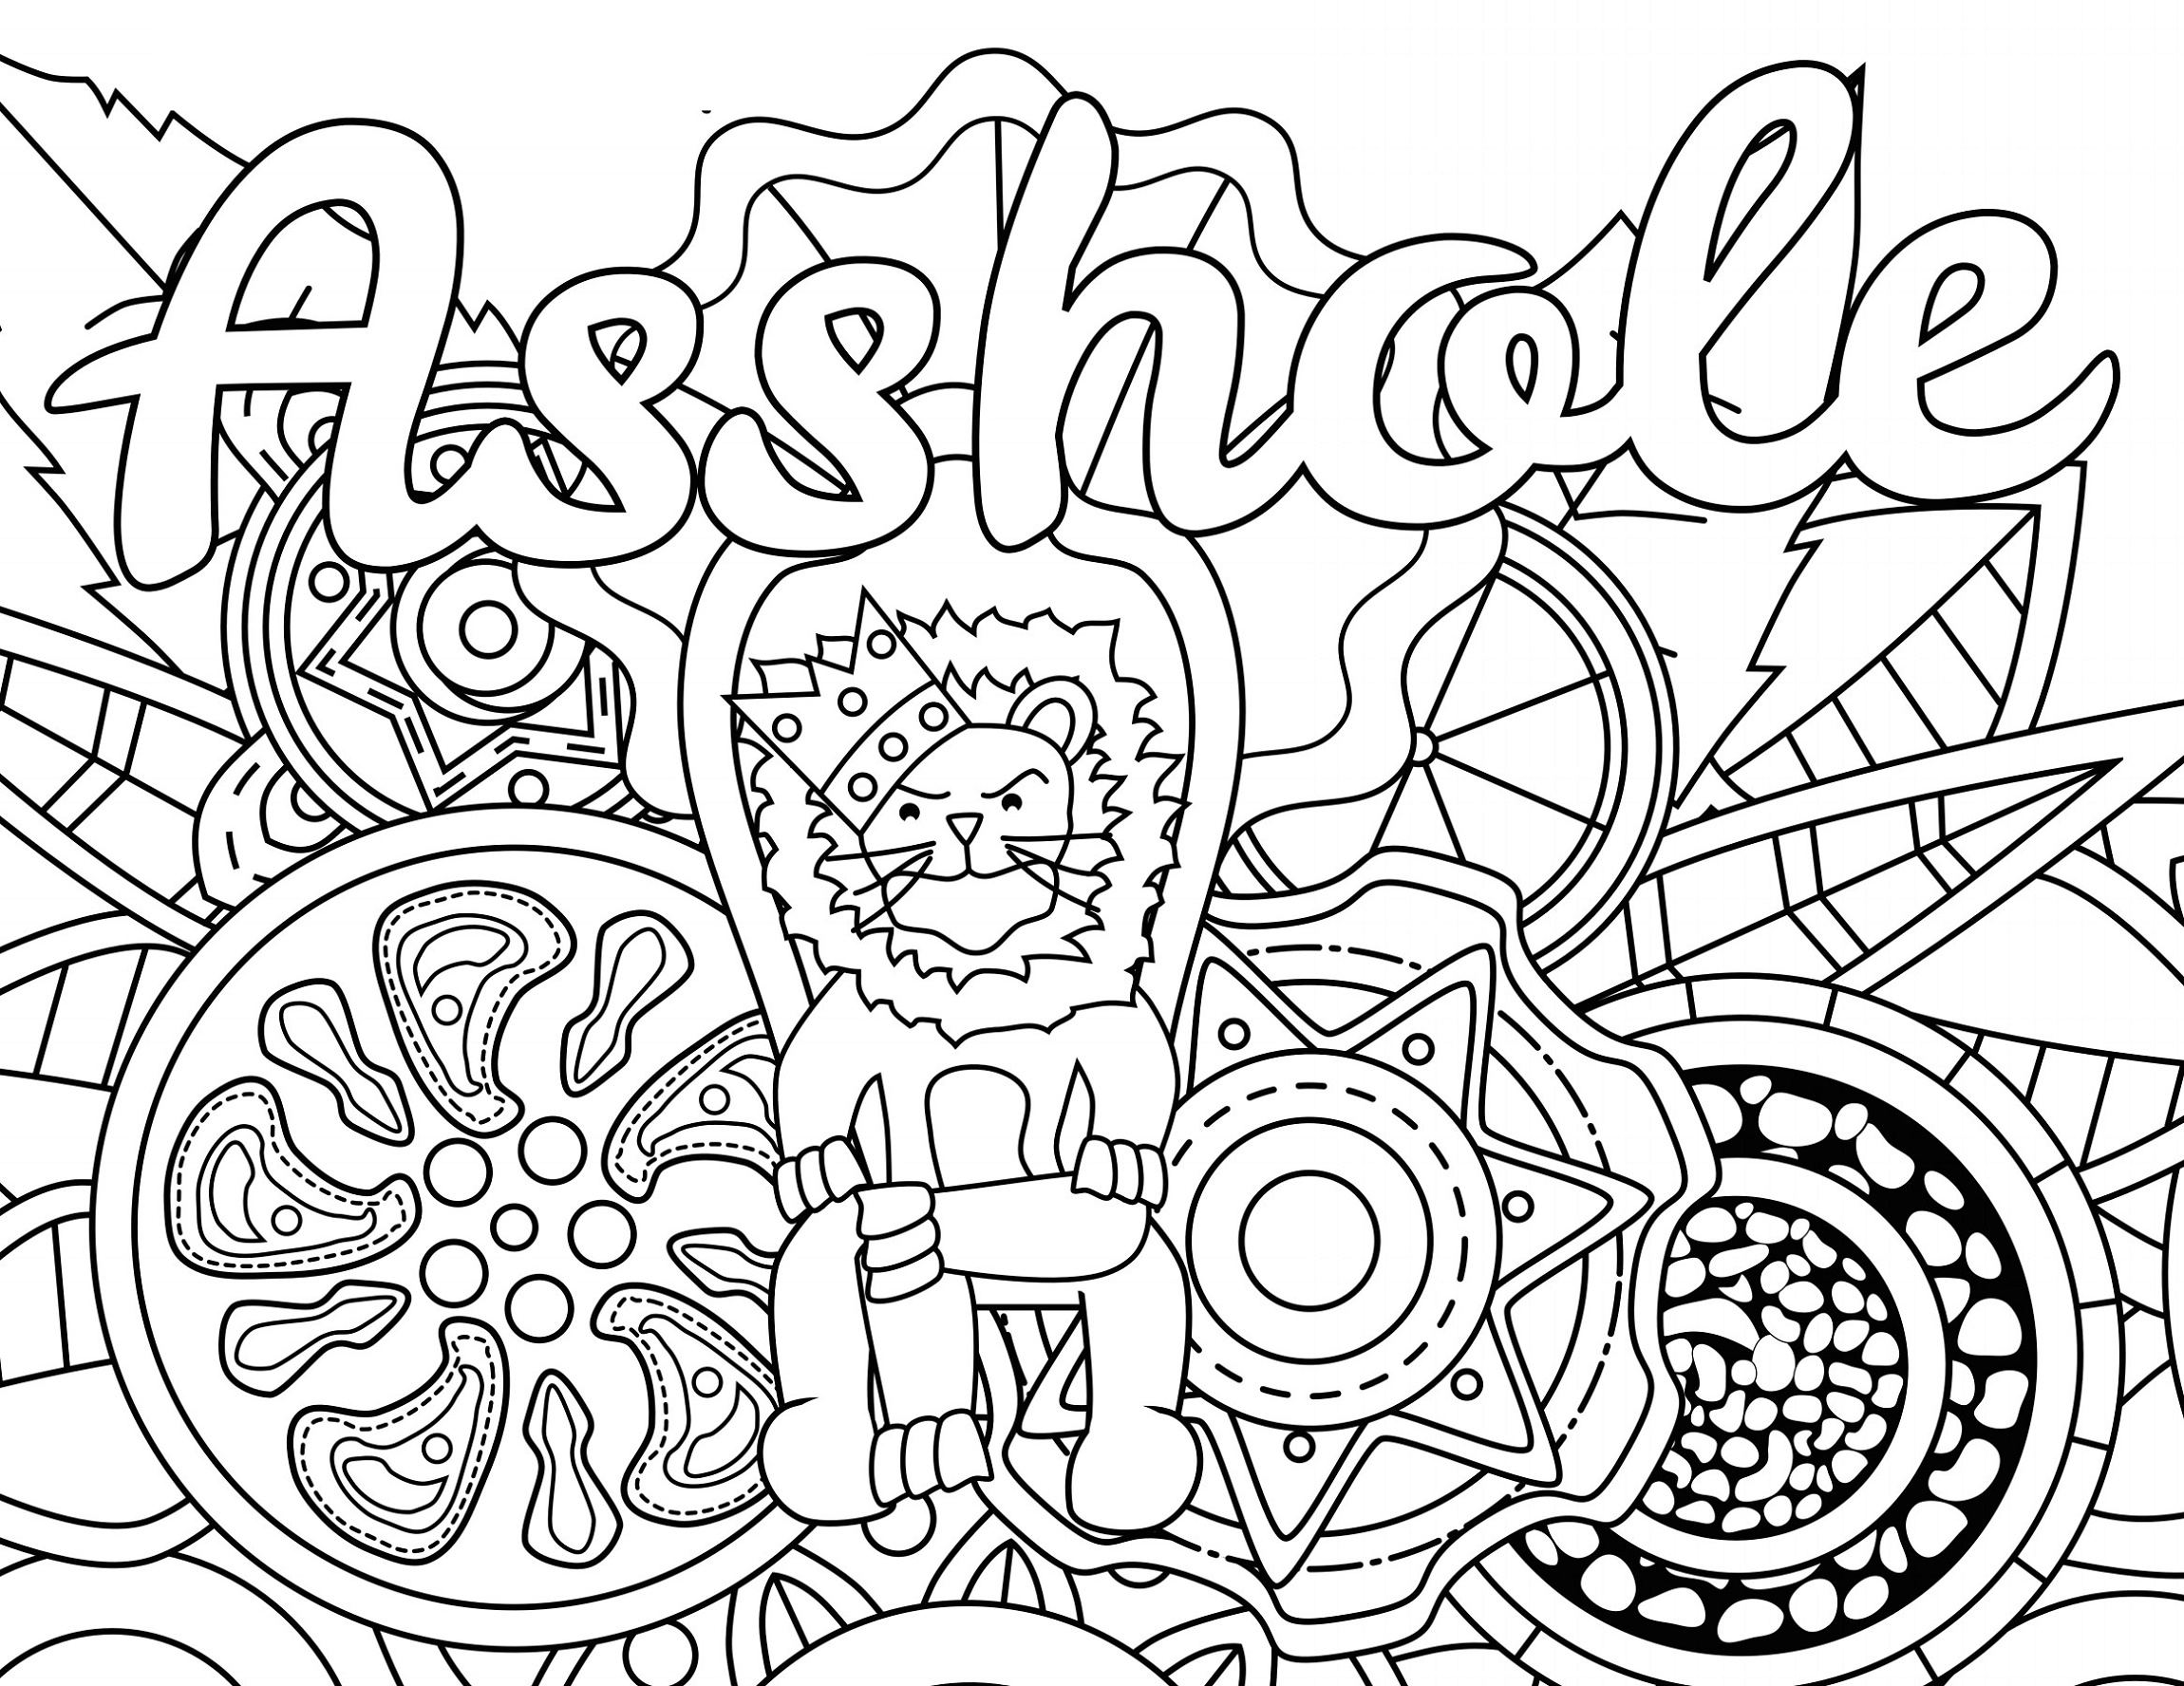 Cuss Word Coloring Book Asshole